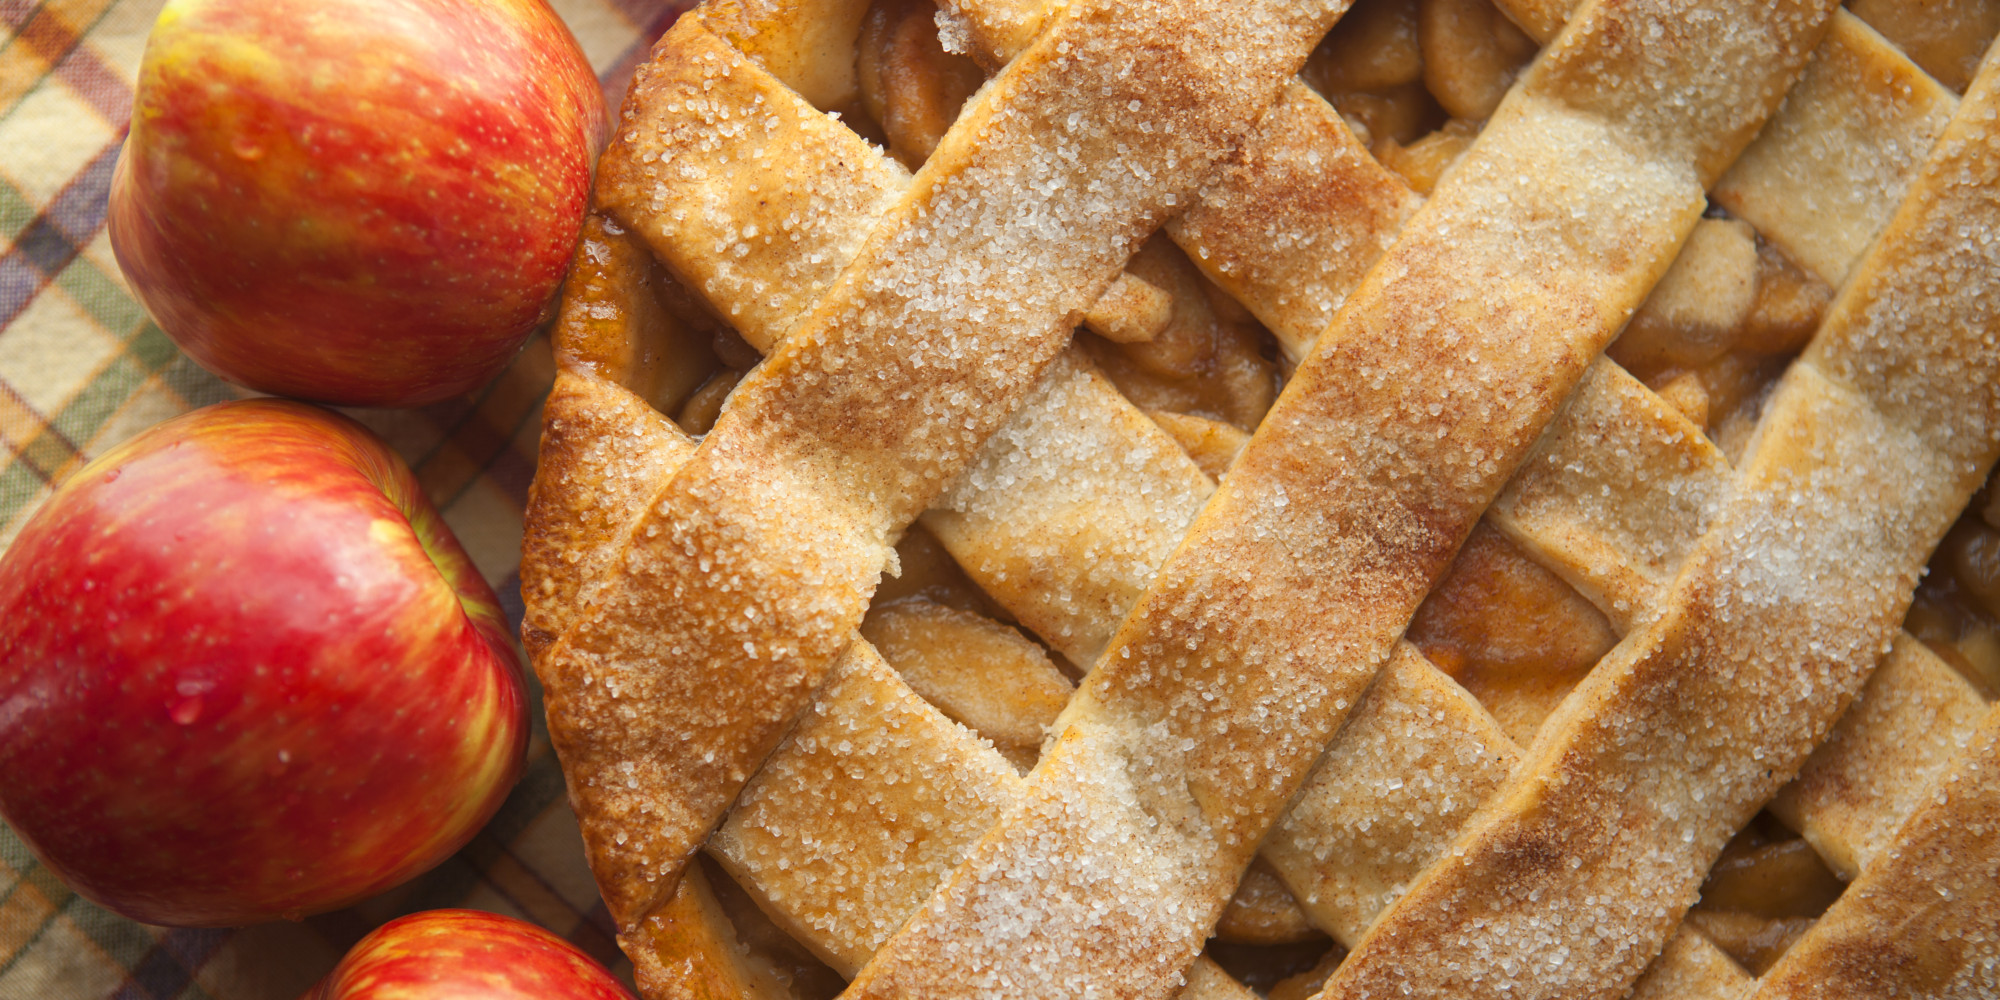 Fireworks! Parades! Barbecues! And Apple Pie…